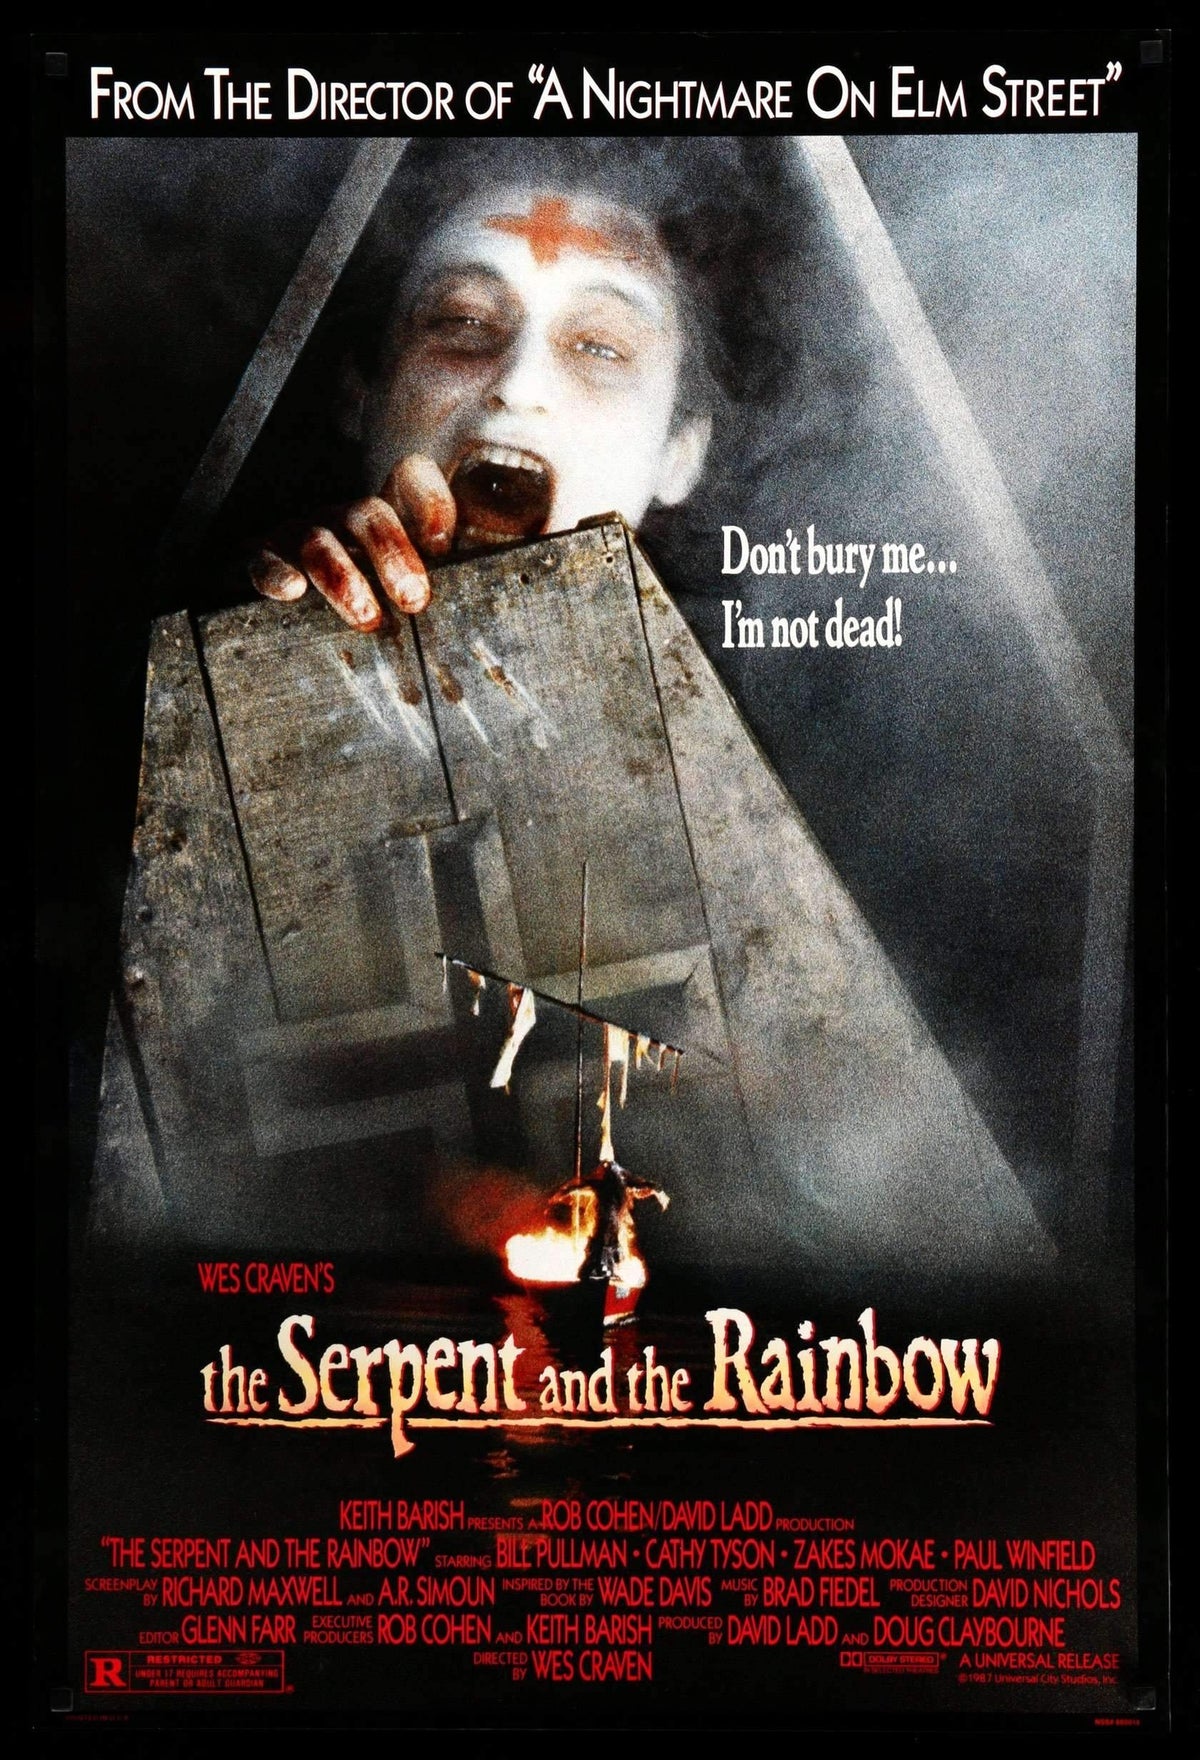 Serpent and the Rainbow (1988) original movie poster for sale at Original Film Art